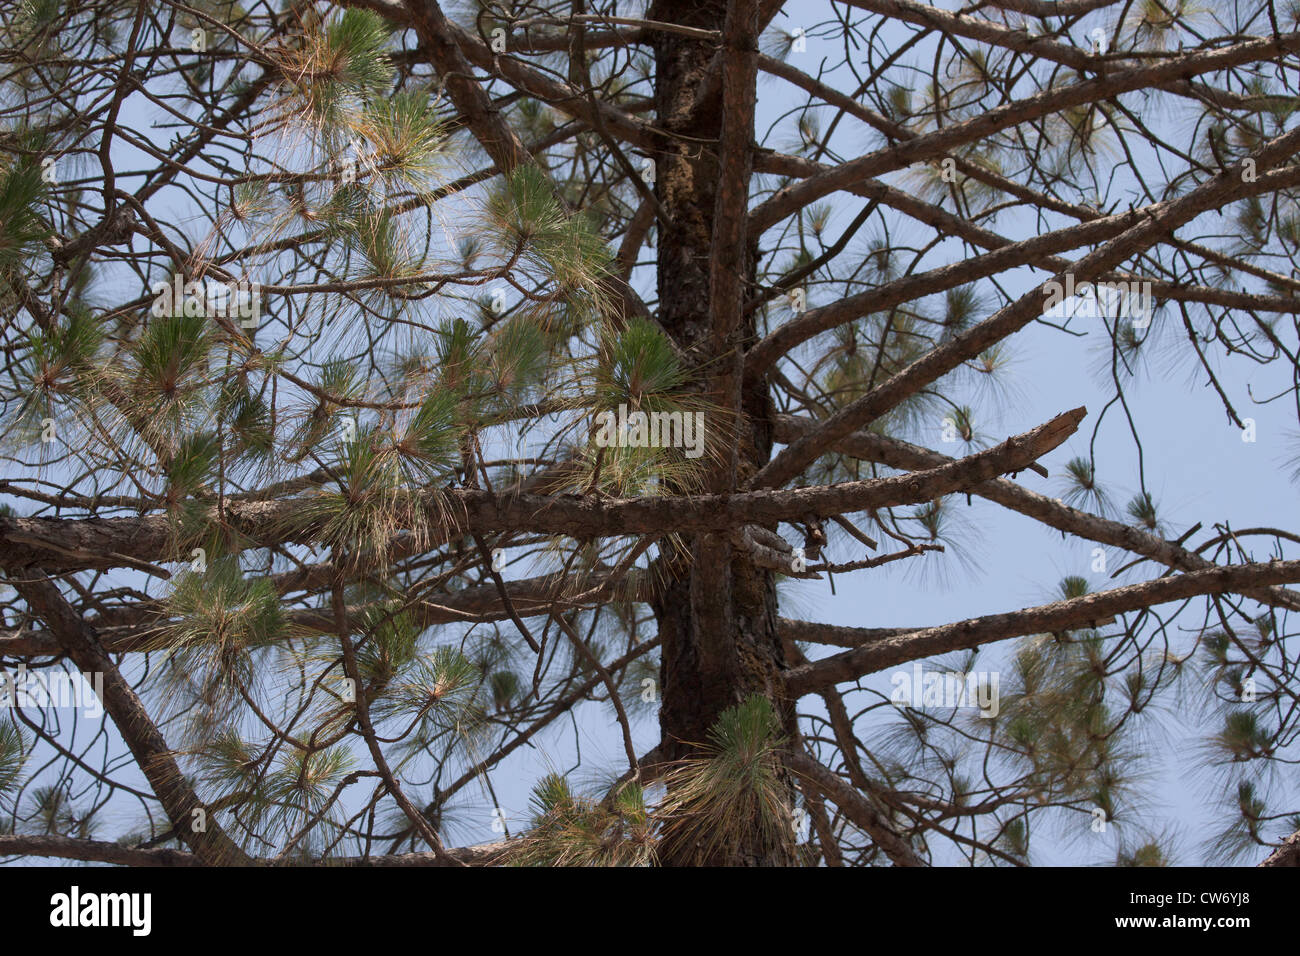 Cross section of a pine tree with the tree trunk, branches and the needles Stock Photo